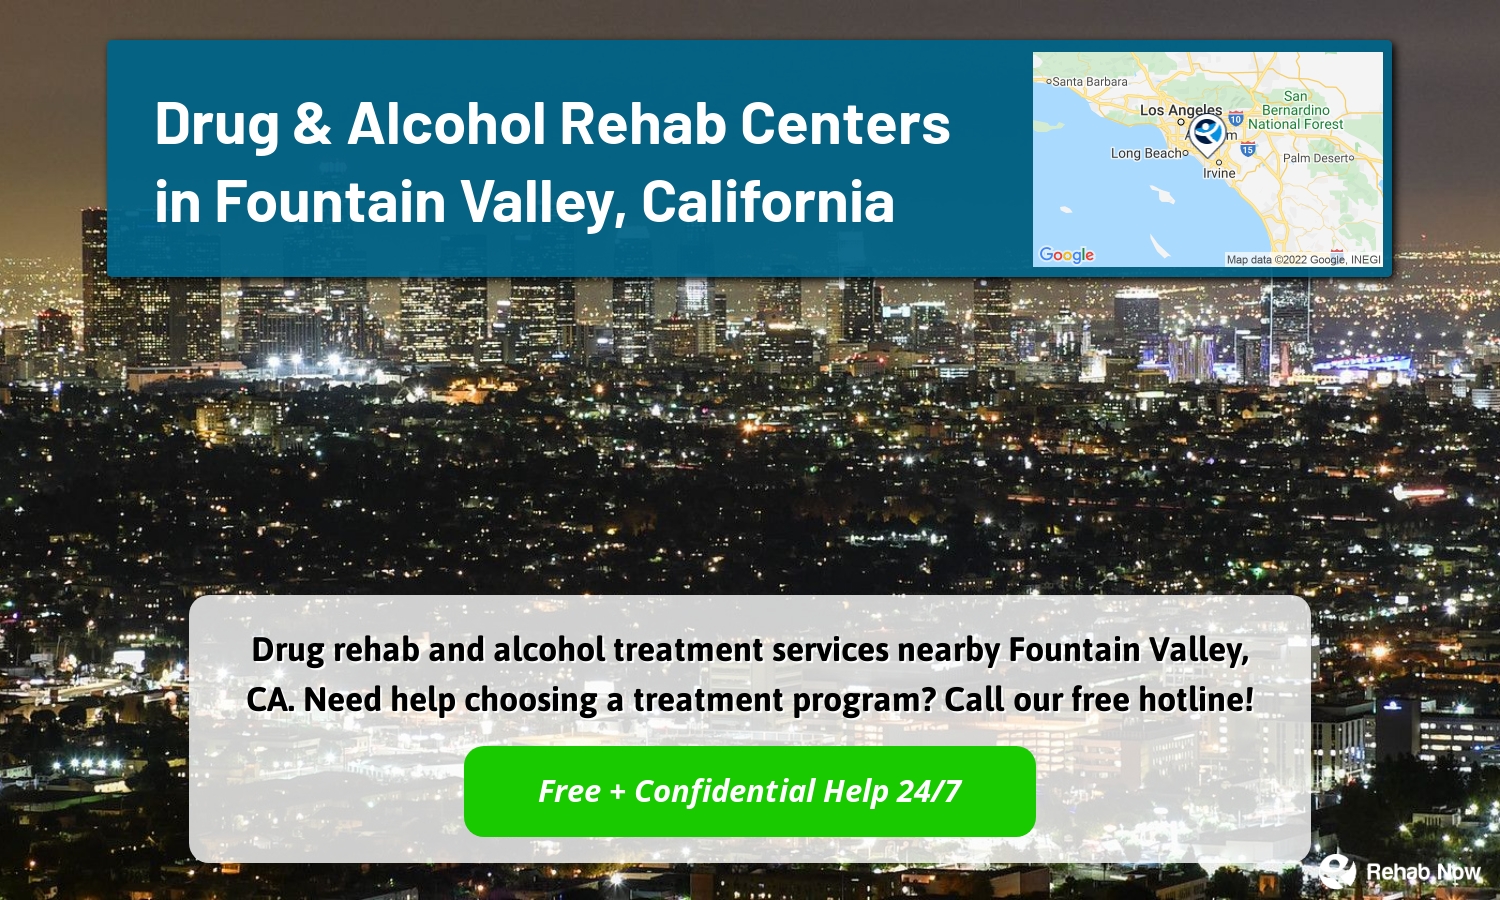 Drug rehab and alcohol treatment services nearby Fountain Valley, CA. Need help choosing a treatment program? Call our free hotline!